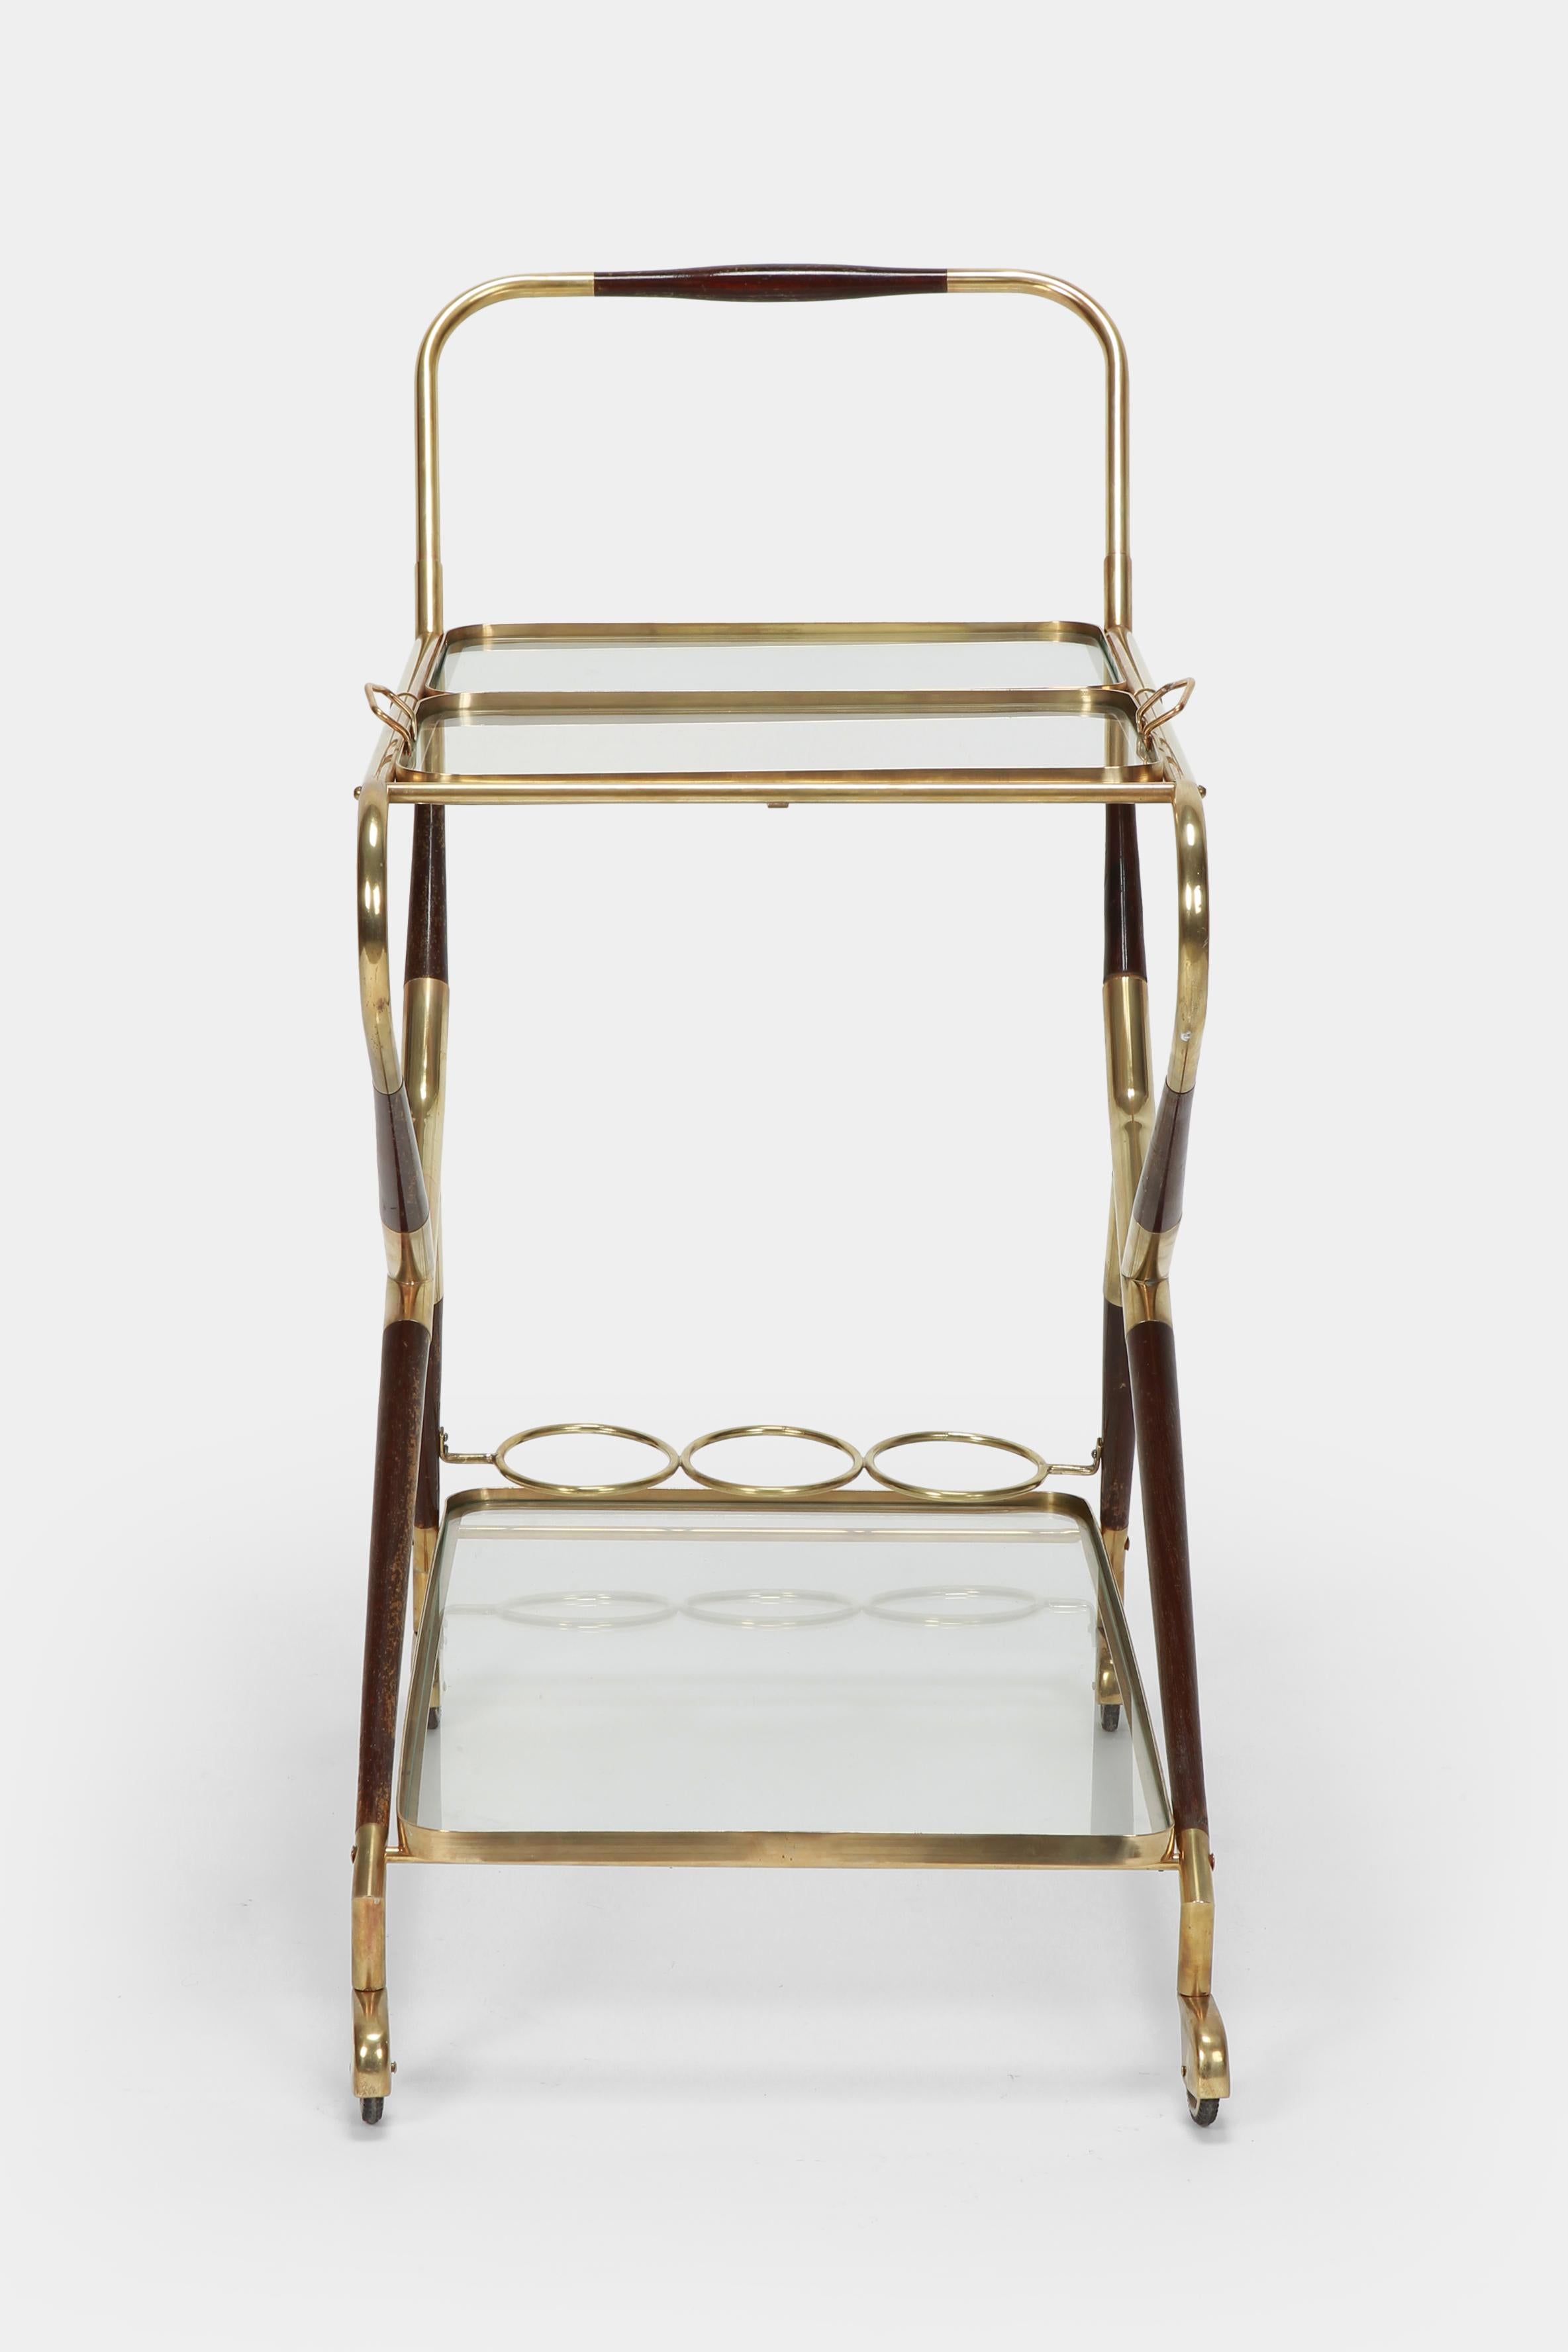 Brass Cesare Lacca Serving Trolley, 1950s